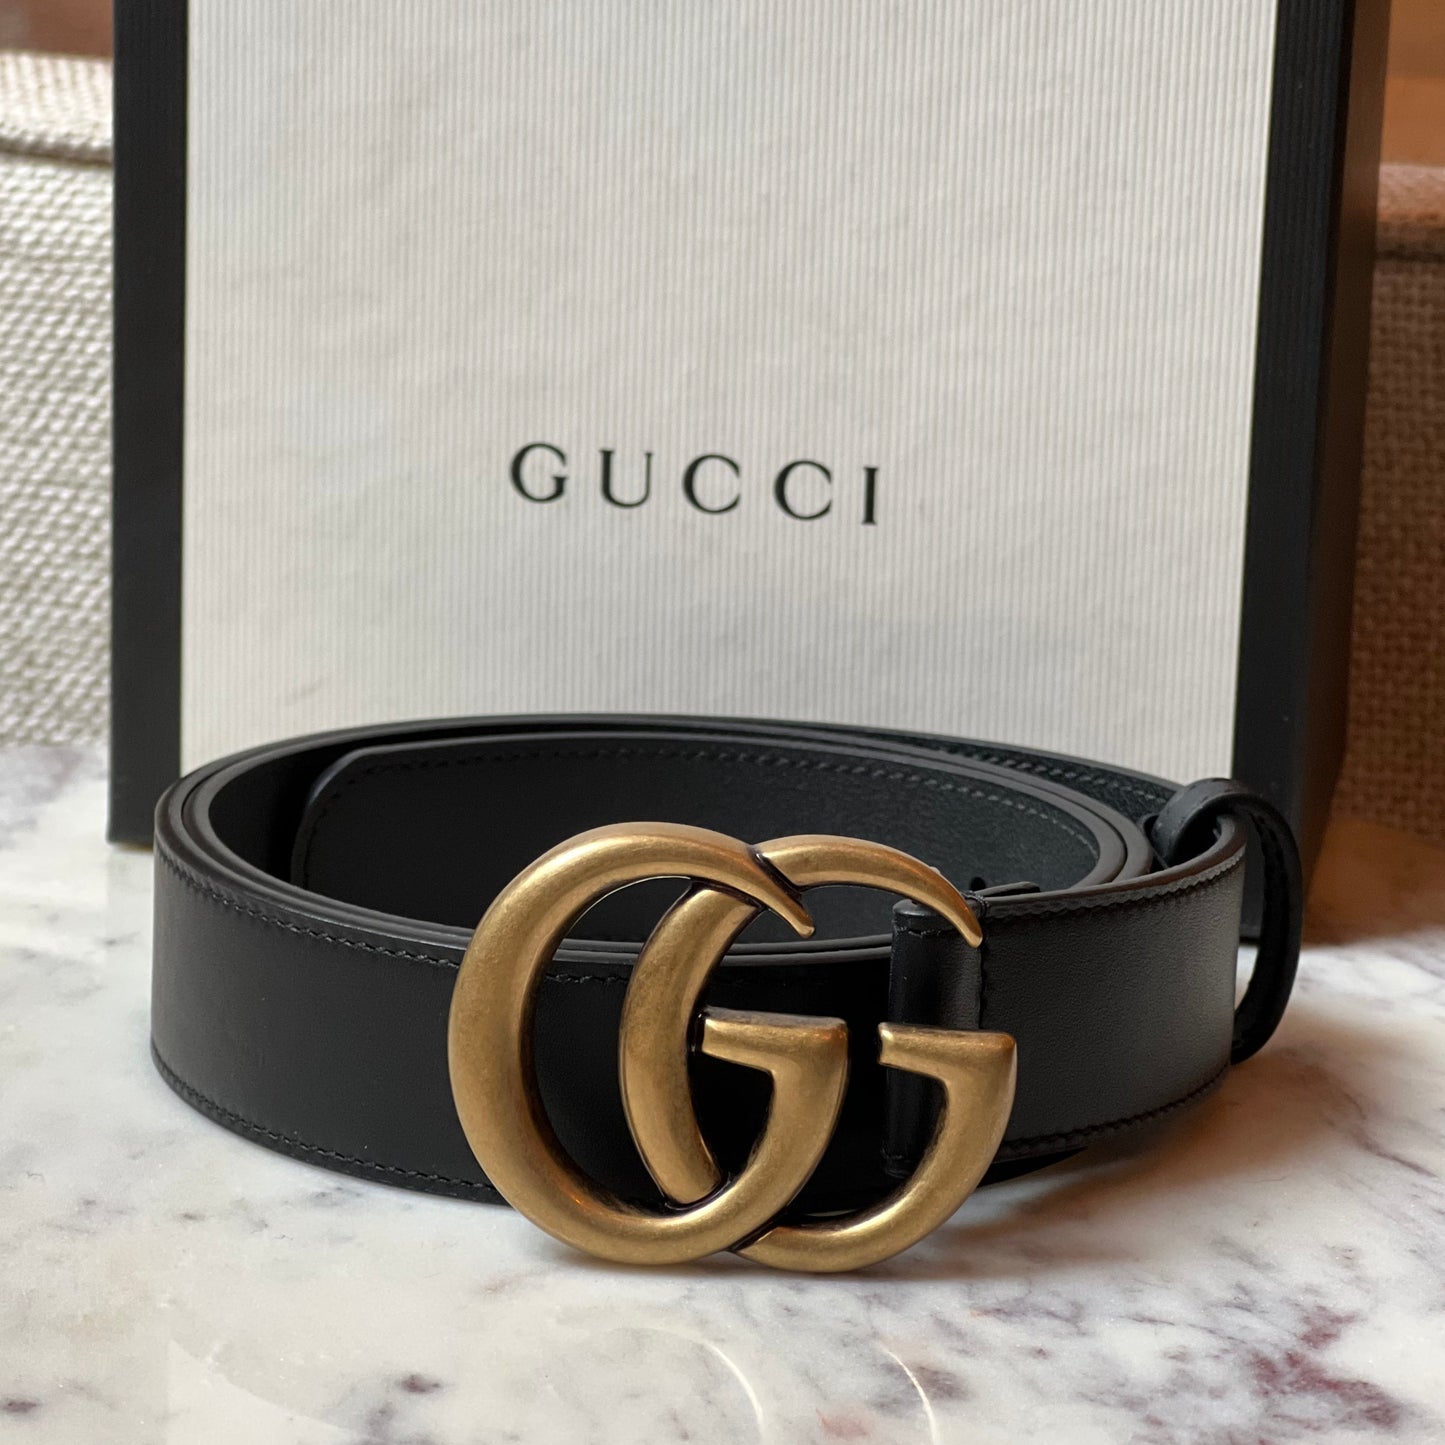 Gucci Calfskin Double G Belt – The Vintage New Yorker